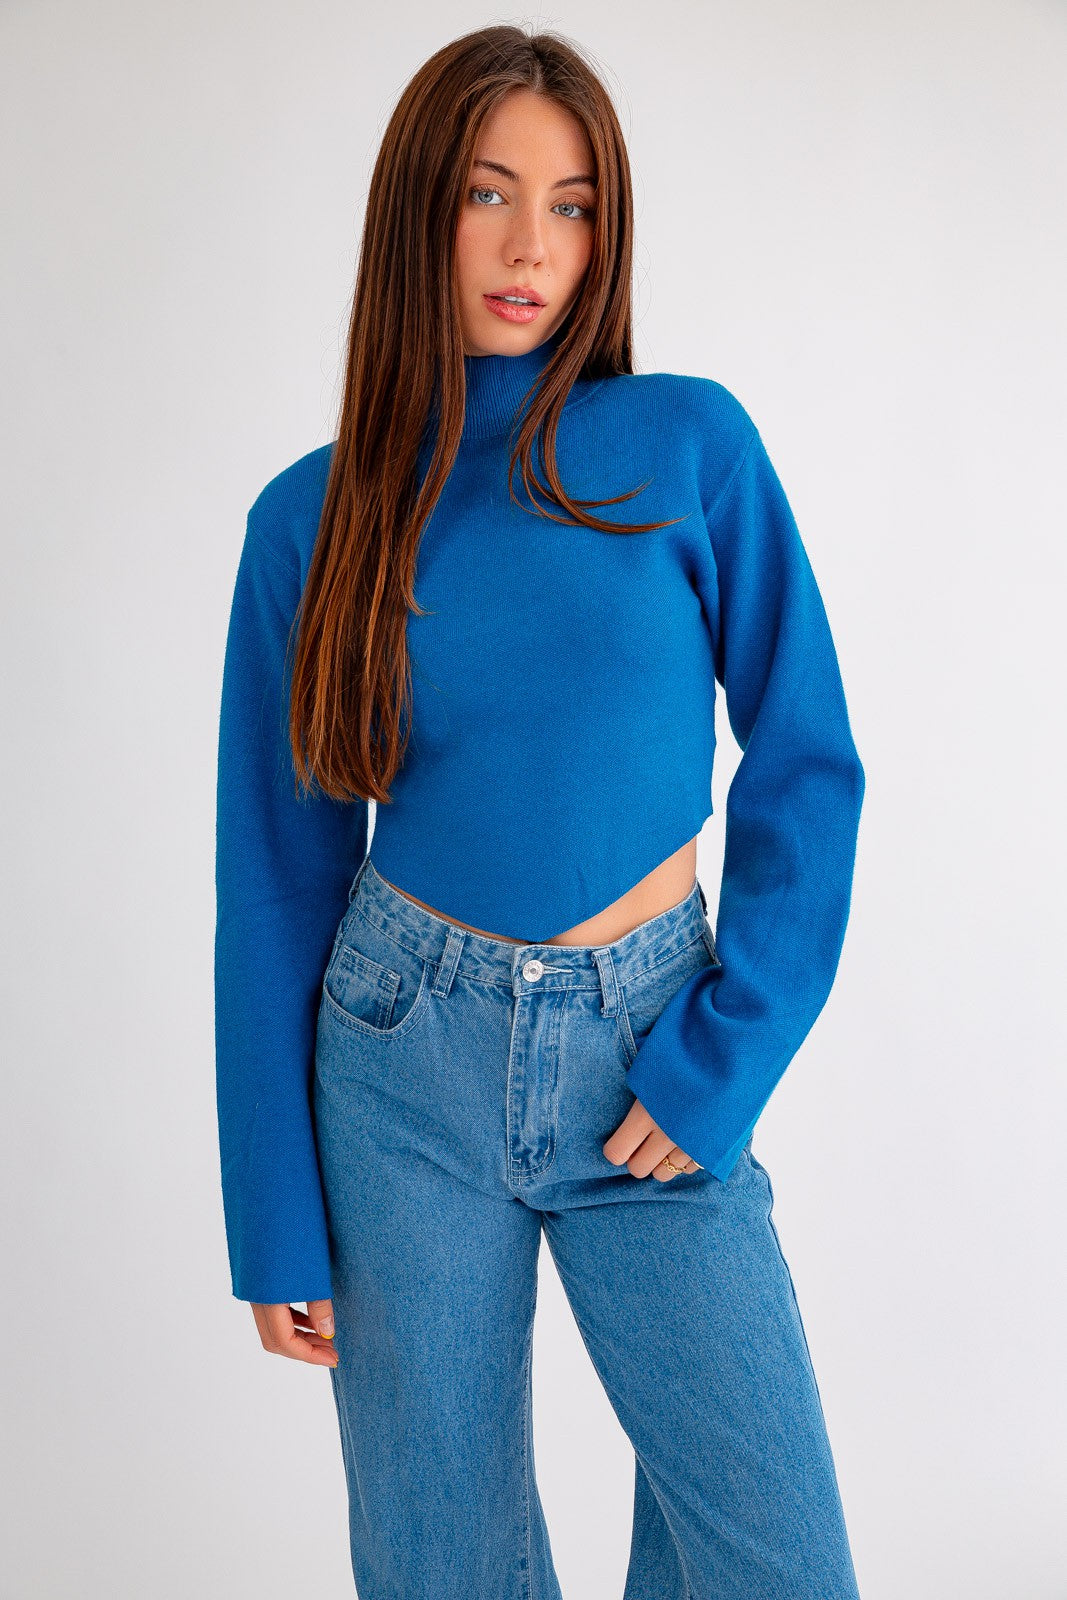 Social Battery Charged Sweater Blue, Sweater by Le Lis | LIT Boutique